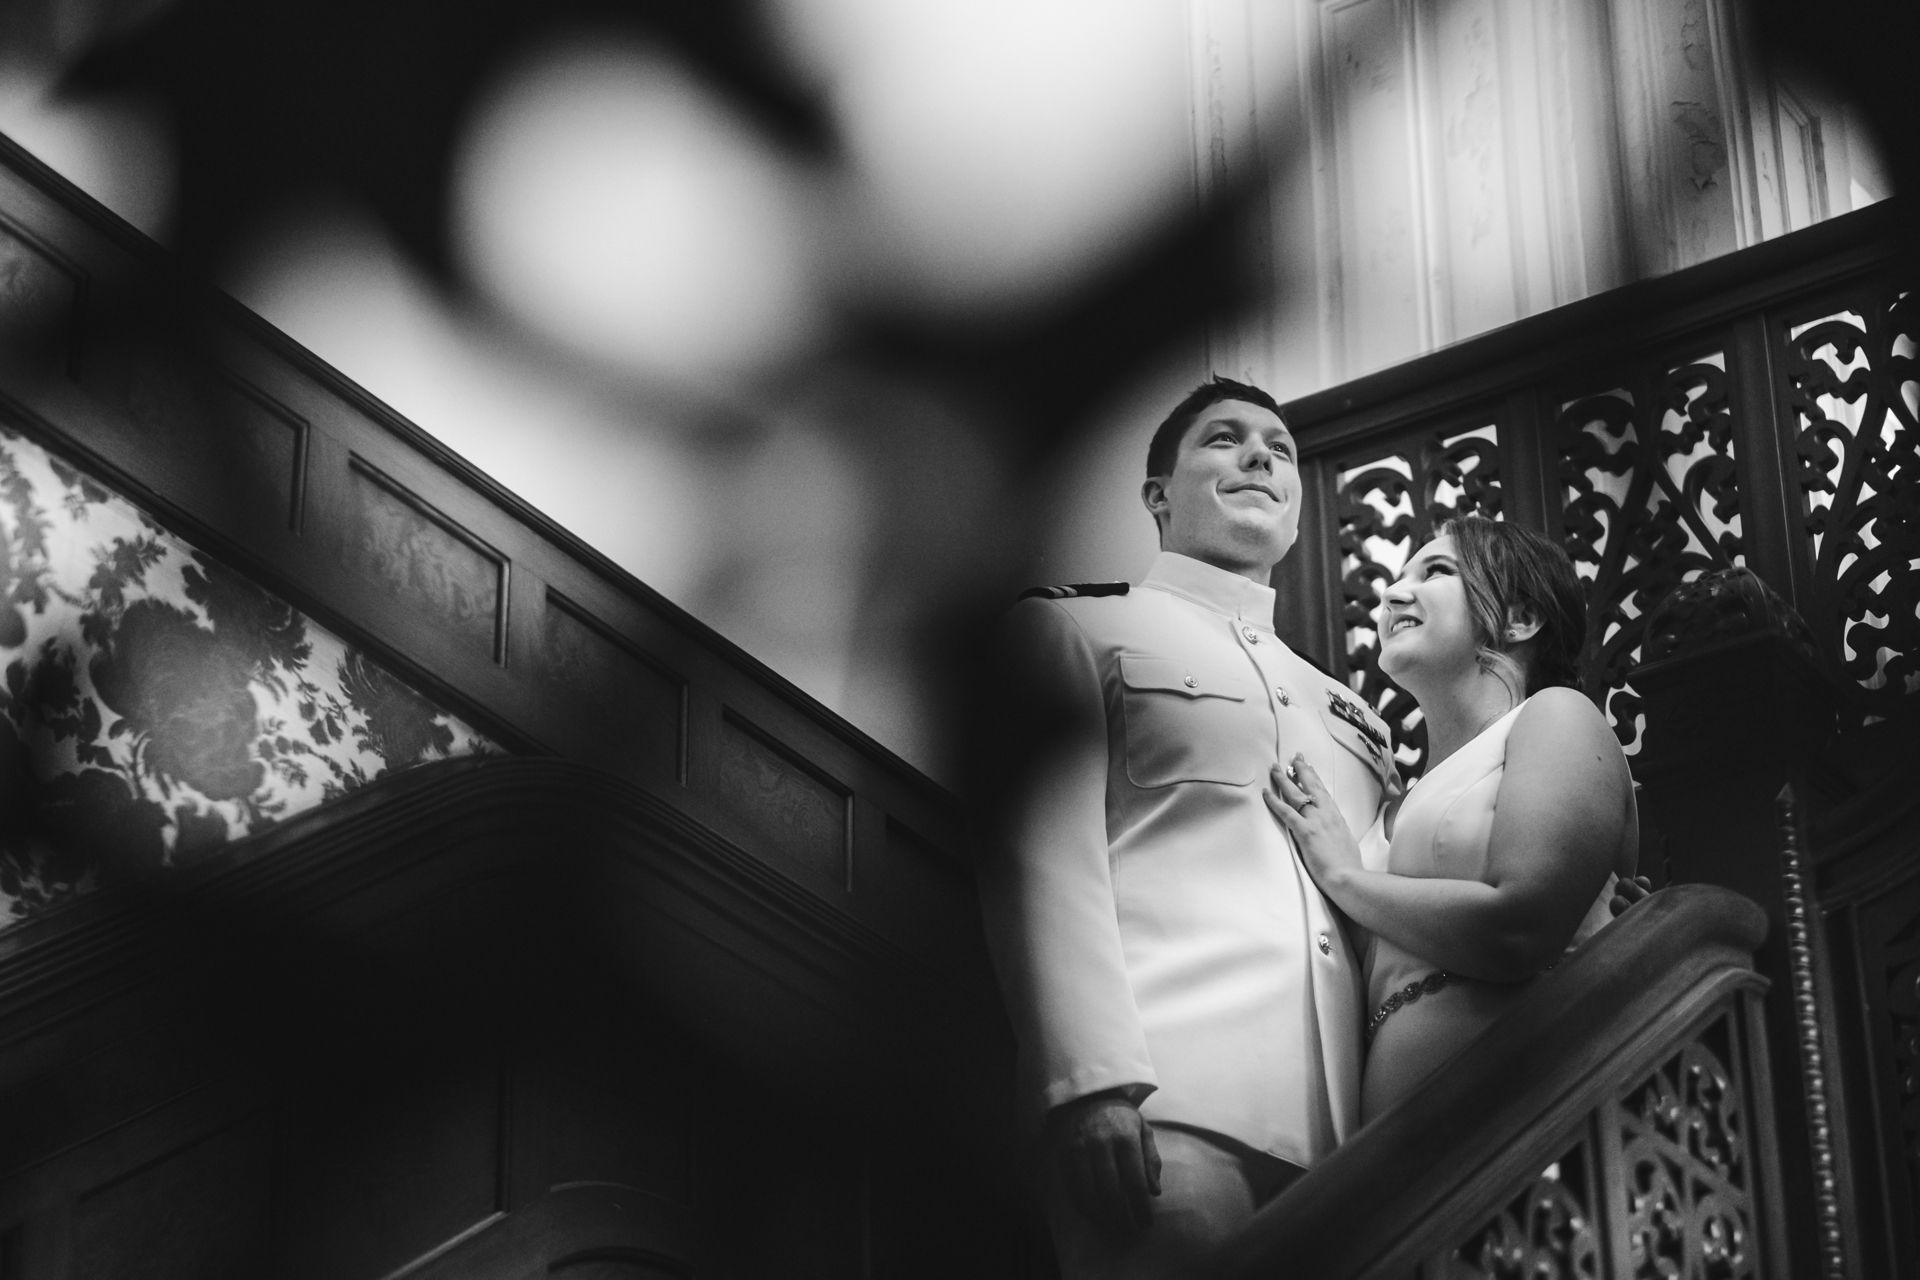 Bride and groom embrace on a wooden staircase with ornate railing.
